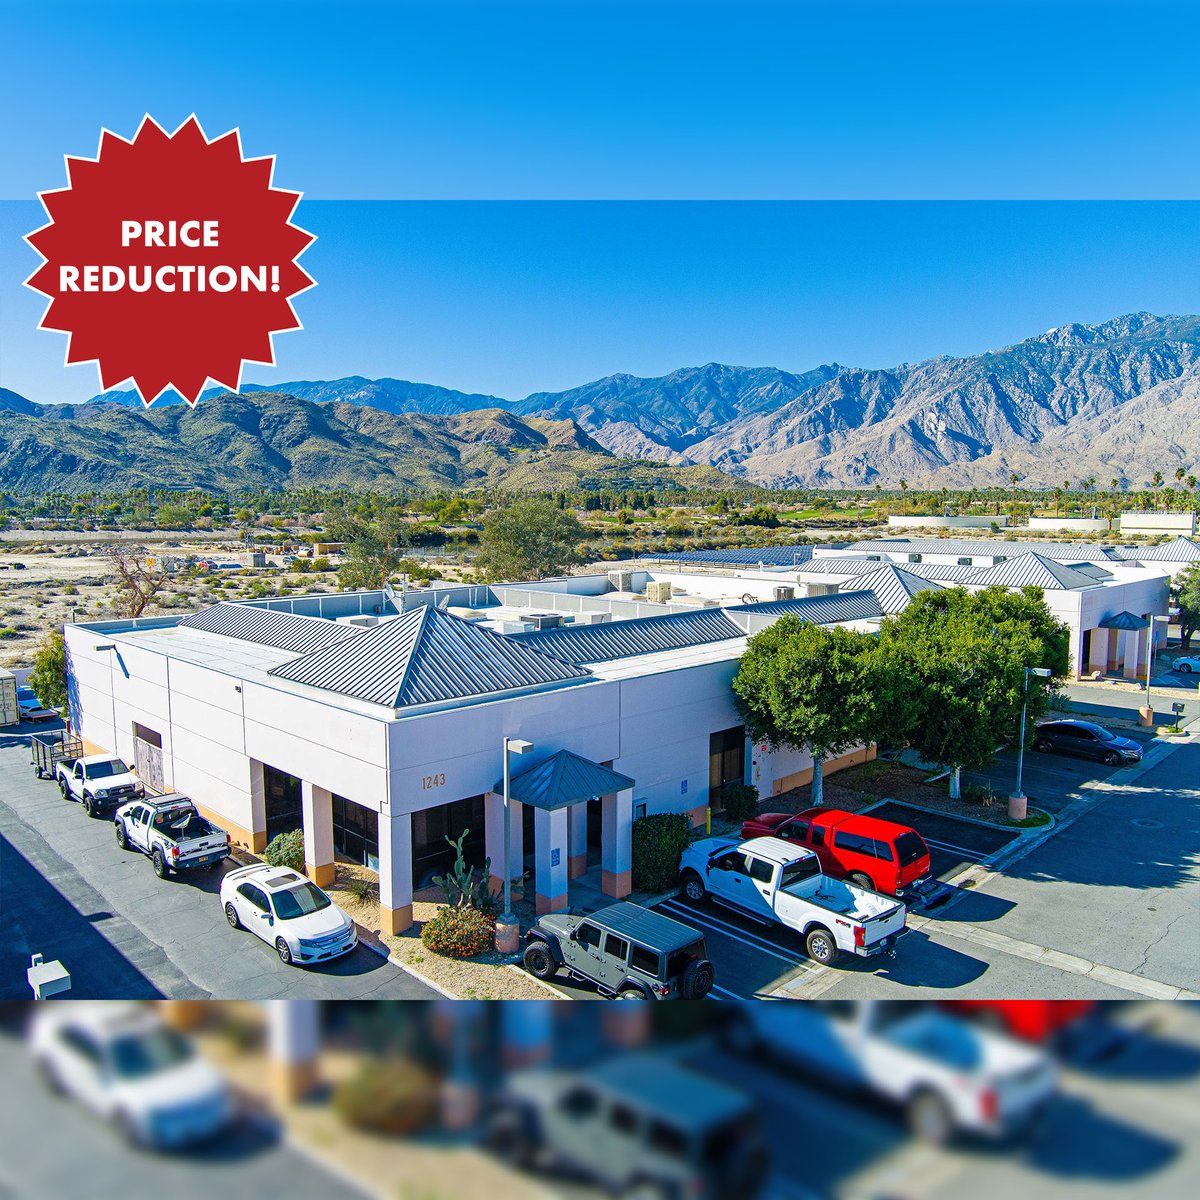 Price Reduction! 5,307 SF Building with Income in Palm Springs!

Listed by:

Susan Harvey
Emily Harvey

#coachellavalley #coachellavalleyrealestate #forsale #socalrealestate #realestate #realtor #realestateagent #property #propertysales #commercial  #PalmSprings